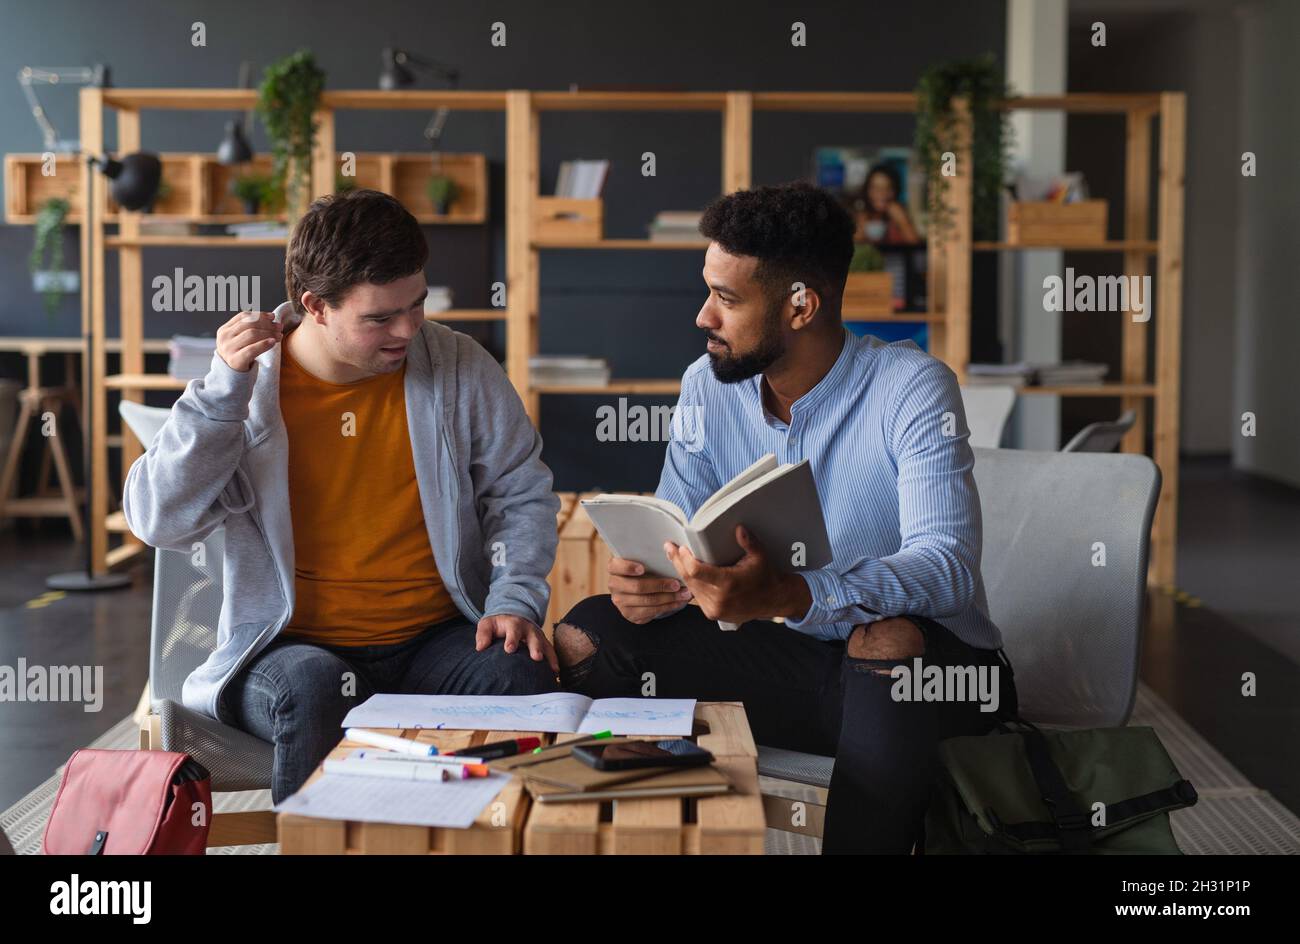 Young happy man with Down syndrome and his tutor studying indoors at school. Stock Photo